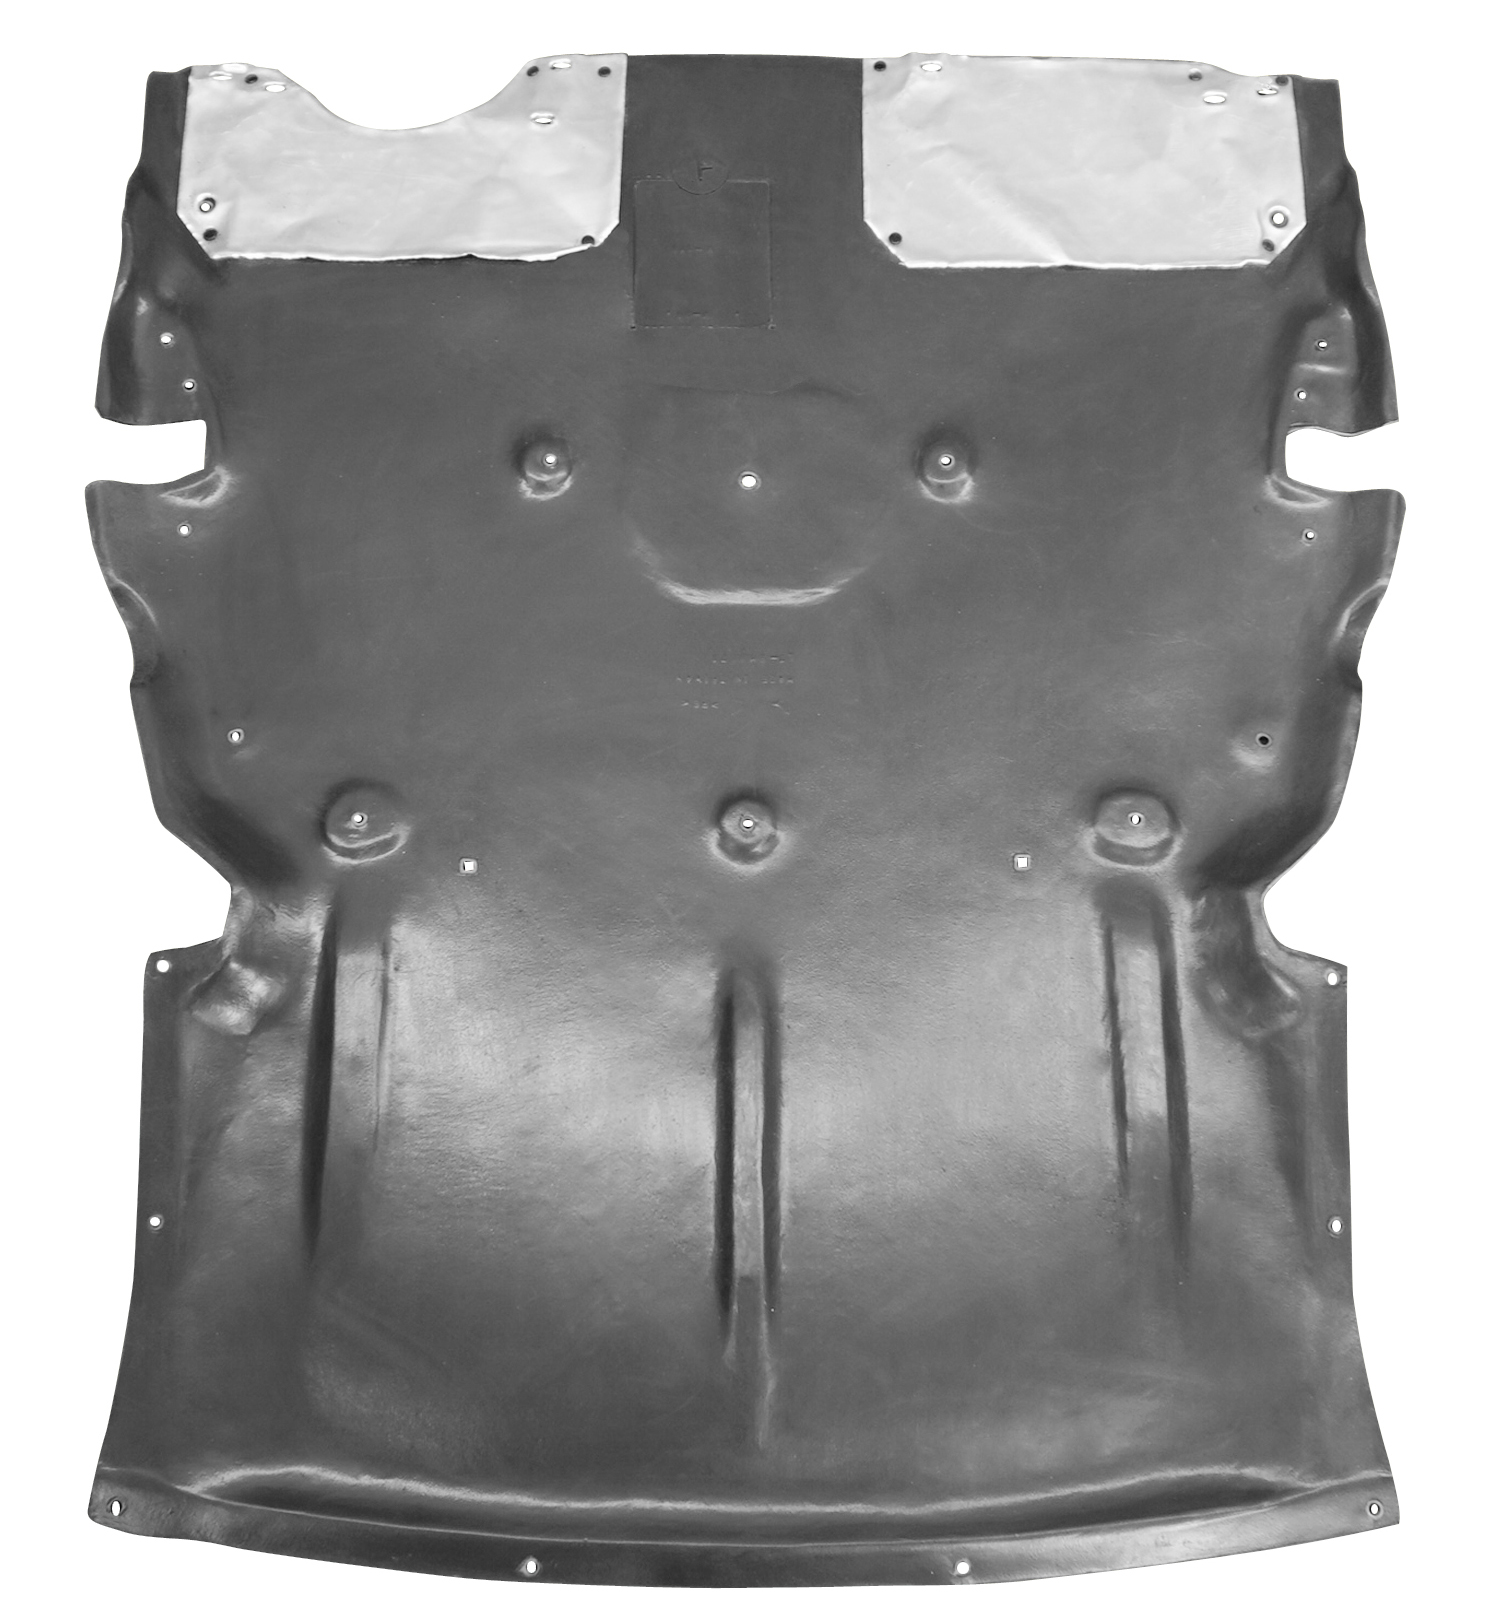 Aftermarket UNDER ENGINE COVERS for BMW - 335I, 335i,12-15,Lower engine cover